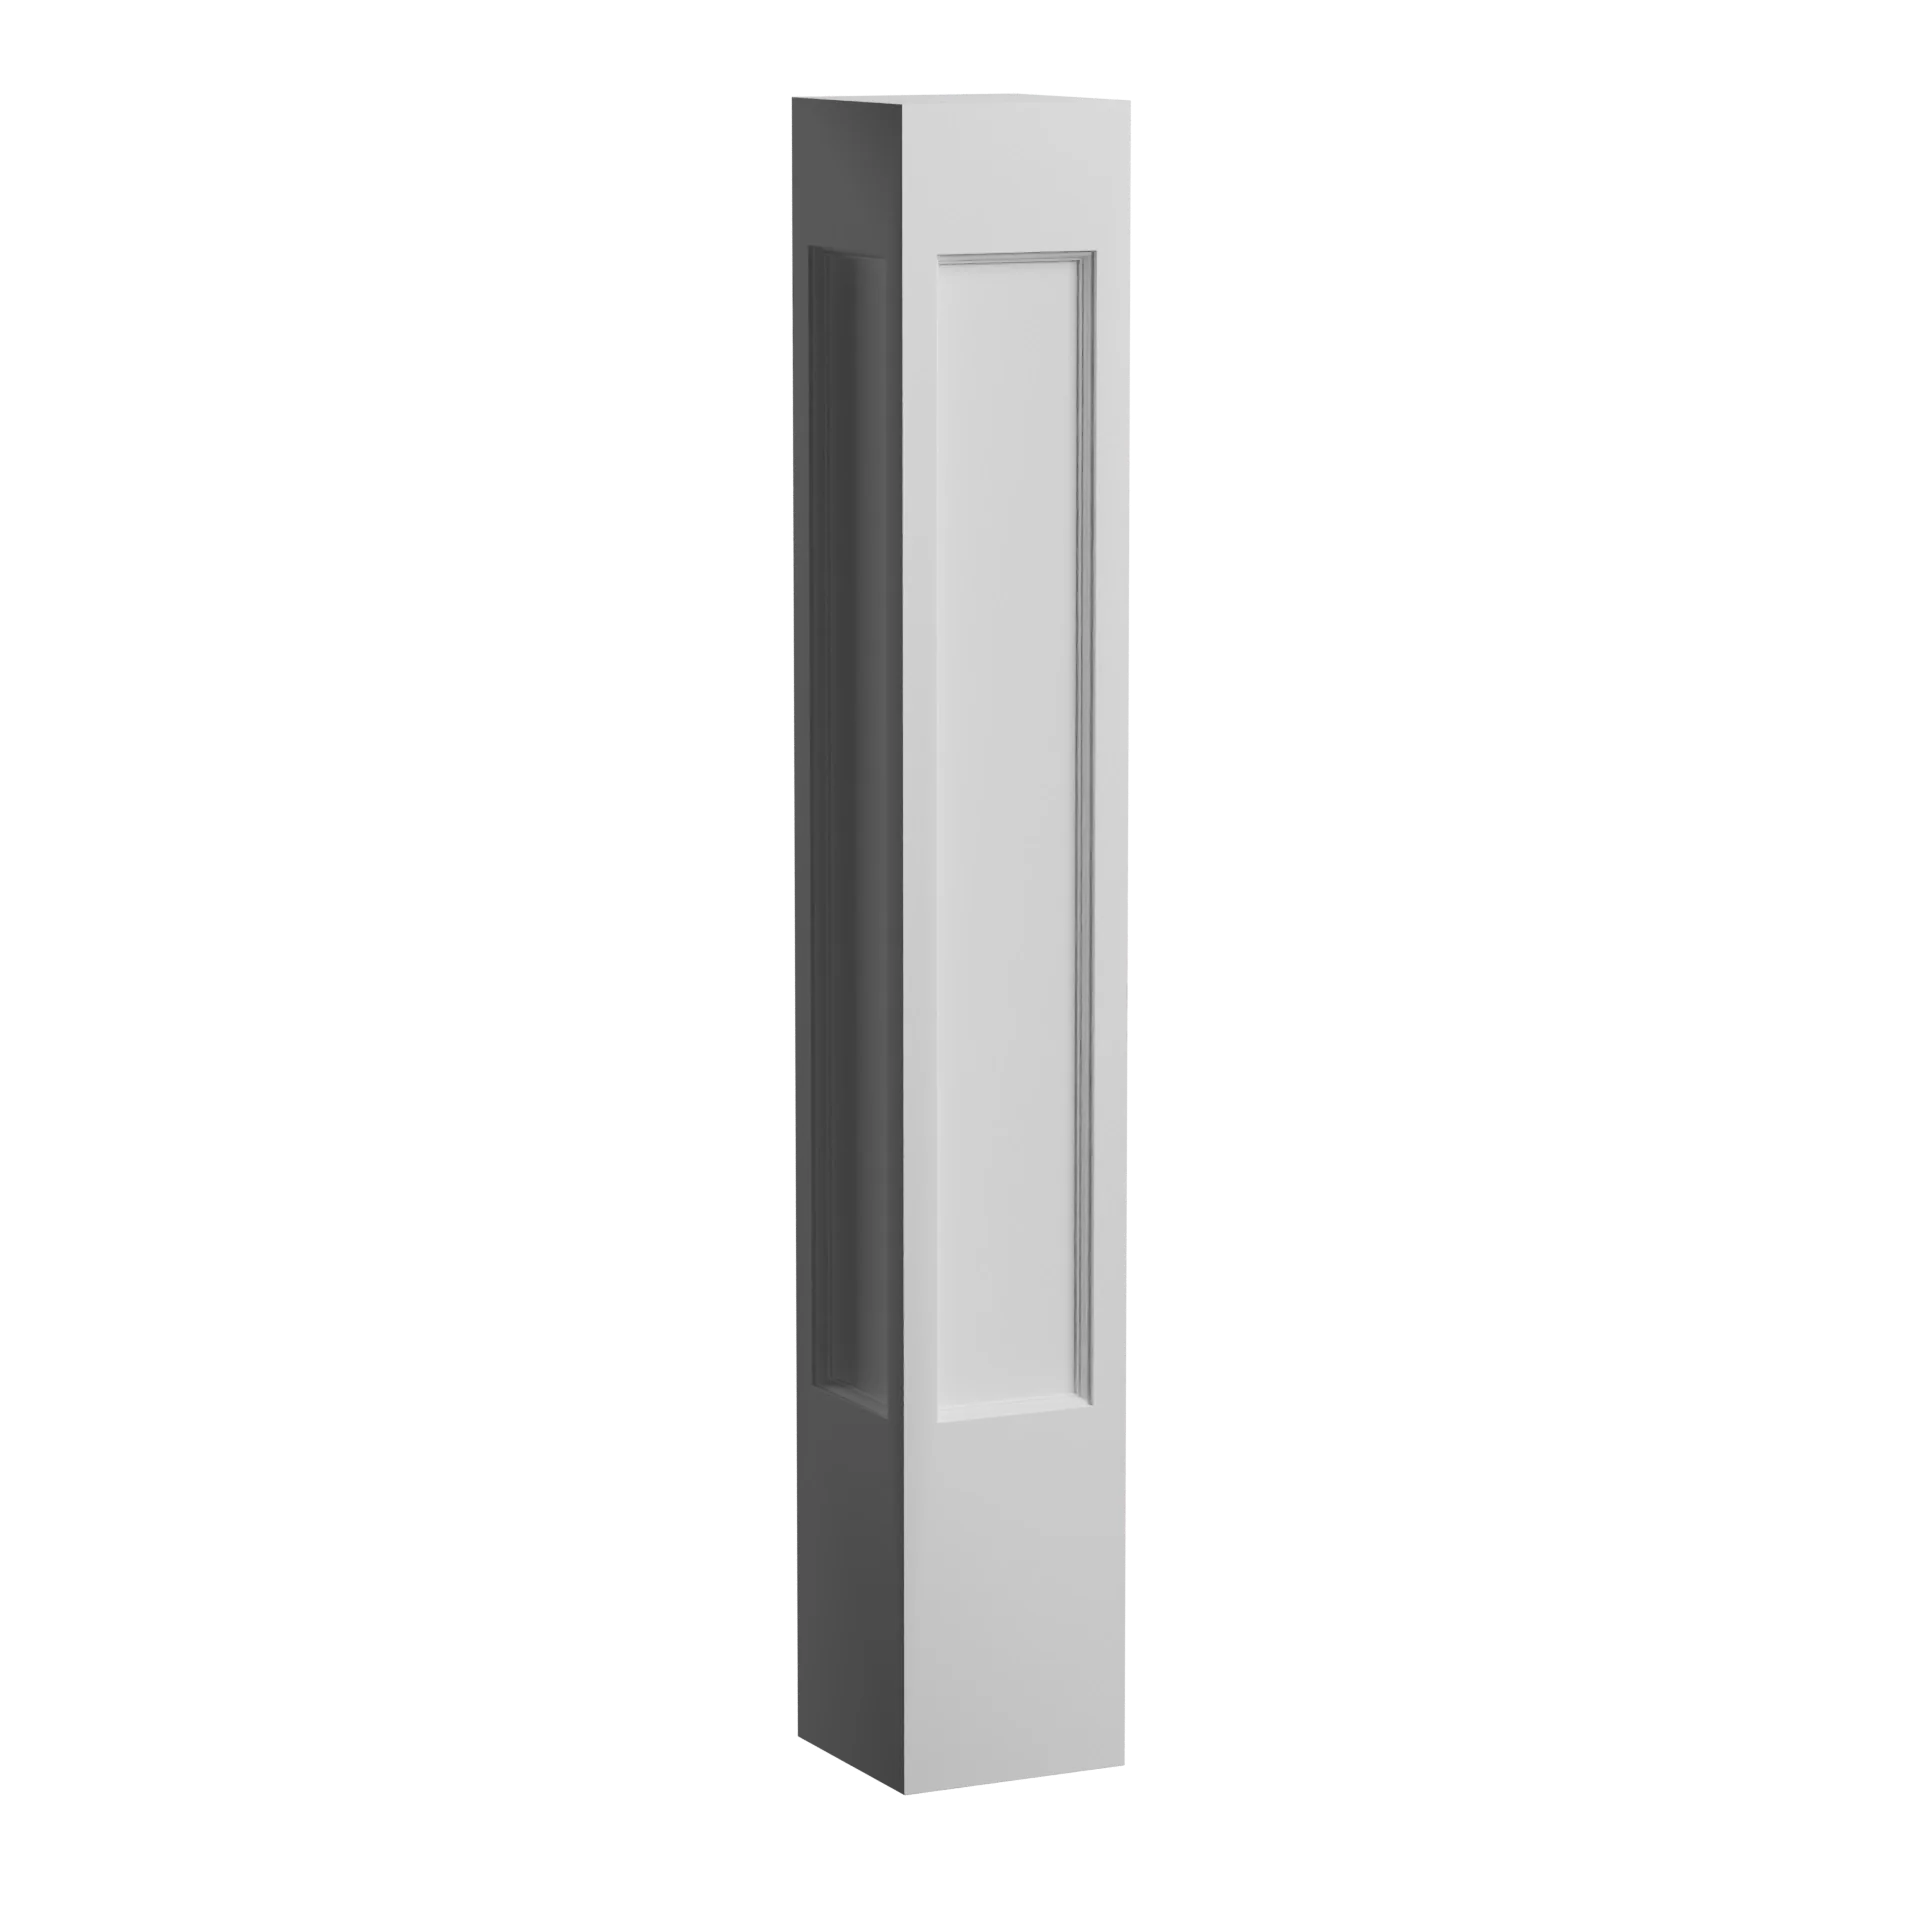 8 Inch W x 48 Inch H Recessed Flat Panel Newel Post End